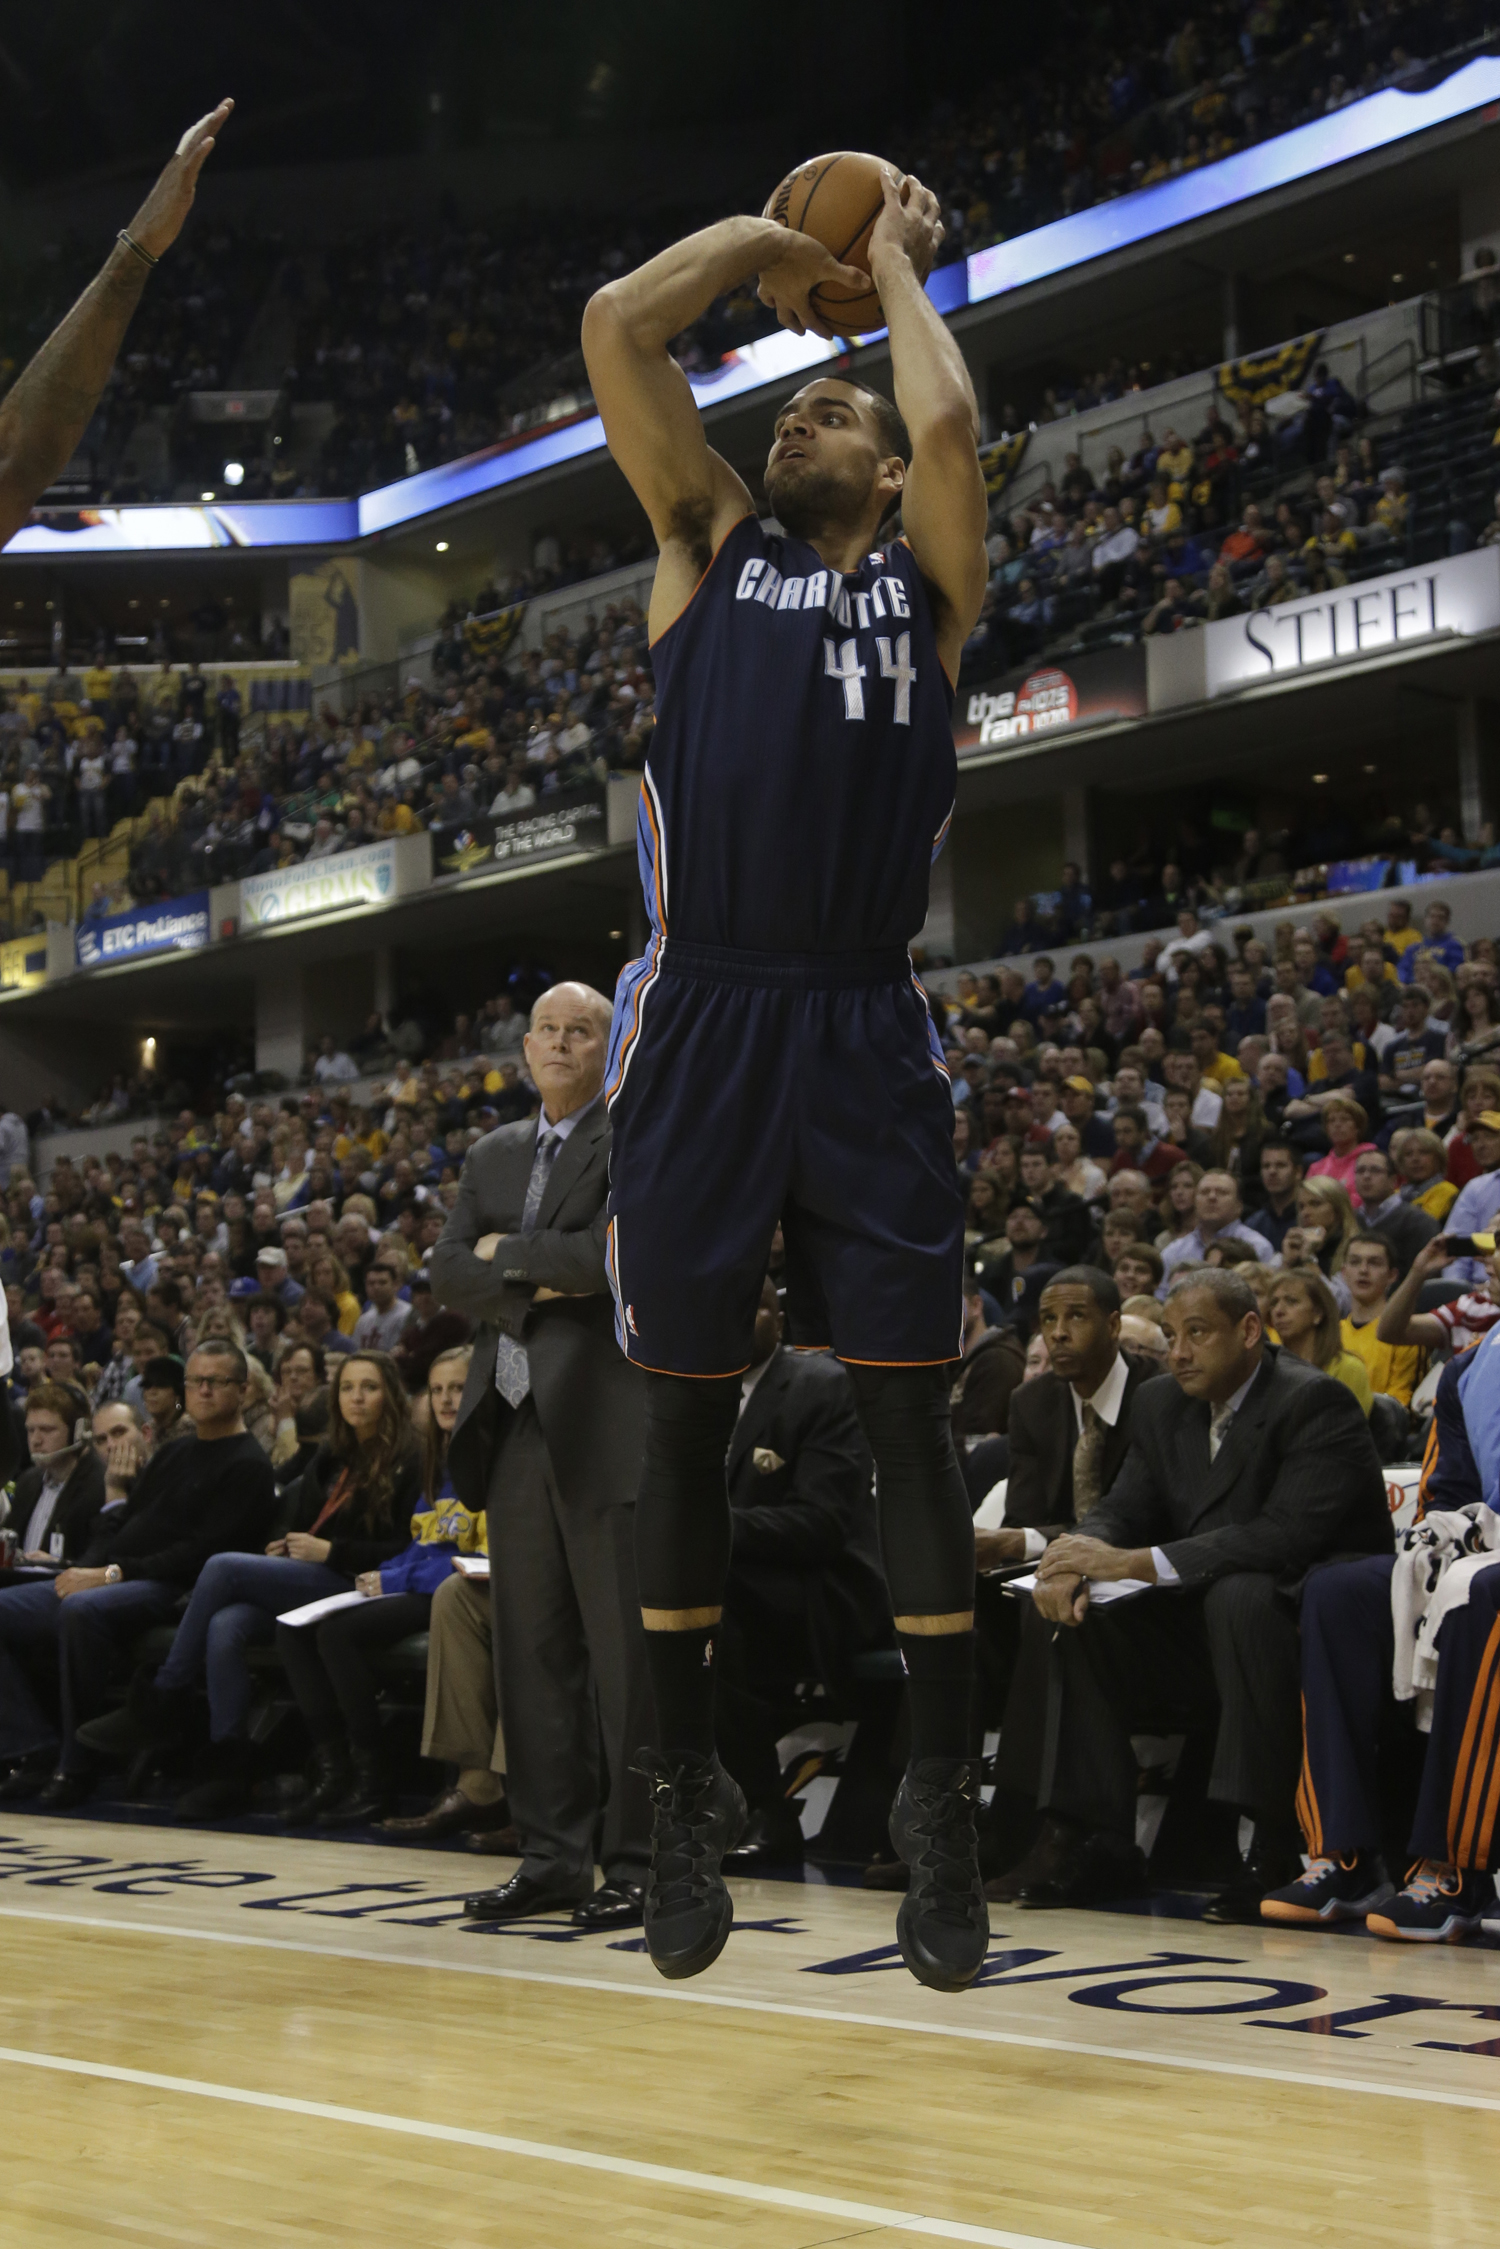 Charlotte Bobcats guard Jeff Taylor (44) shoots during the first half of an NBA basketball game between the Indiana Pacers and the Charlotte Bobcats (now the Hornets) in Indianapolis on Dec. 13, 2013. (Aj Mast — AP)